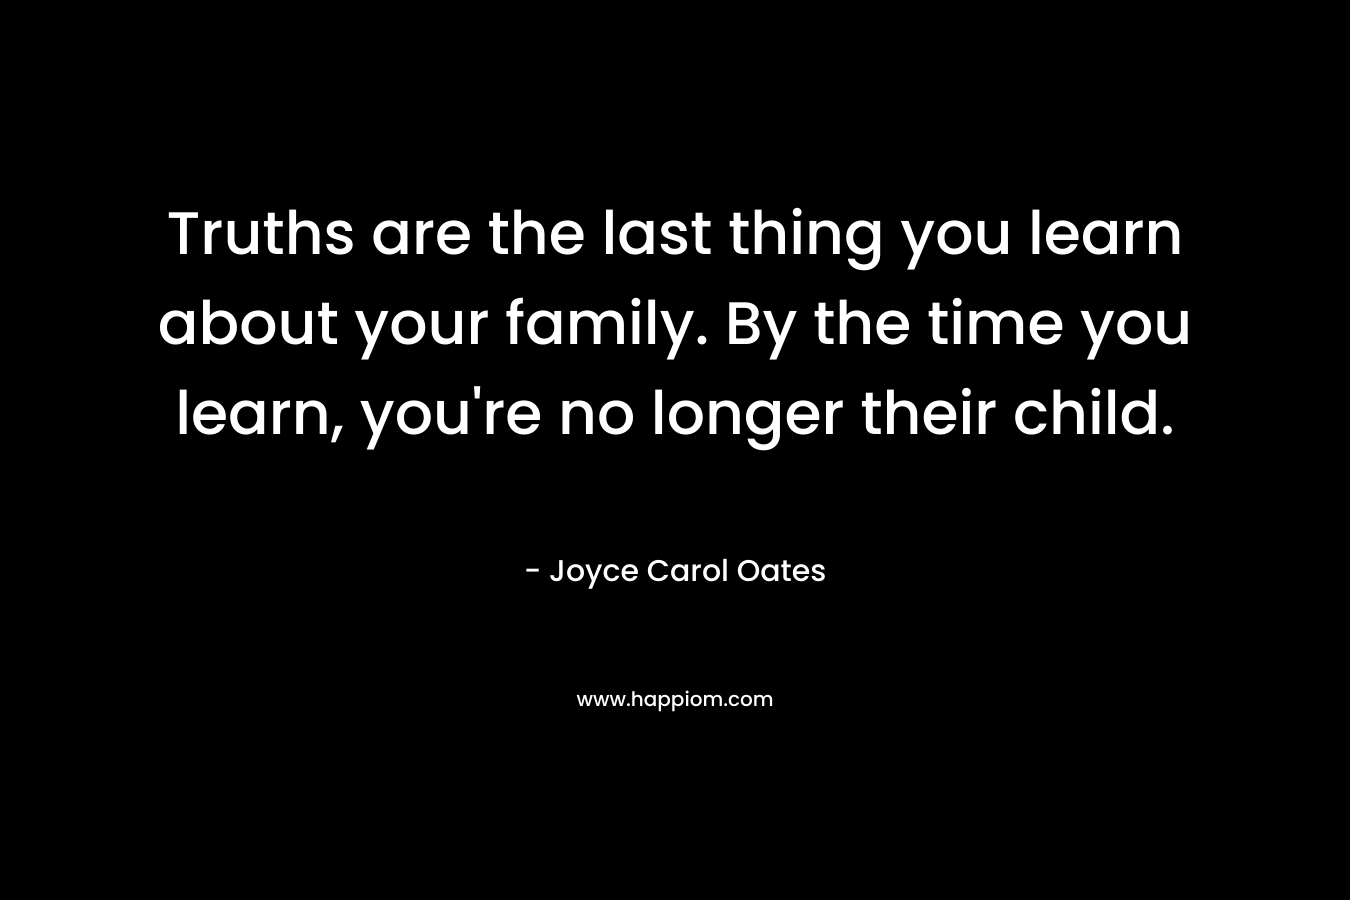 Truths are the last thing you learn about your family. By the time you learn, you’re no longer their child. – Joyce Carol Oates